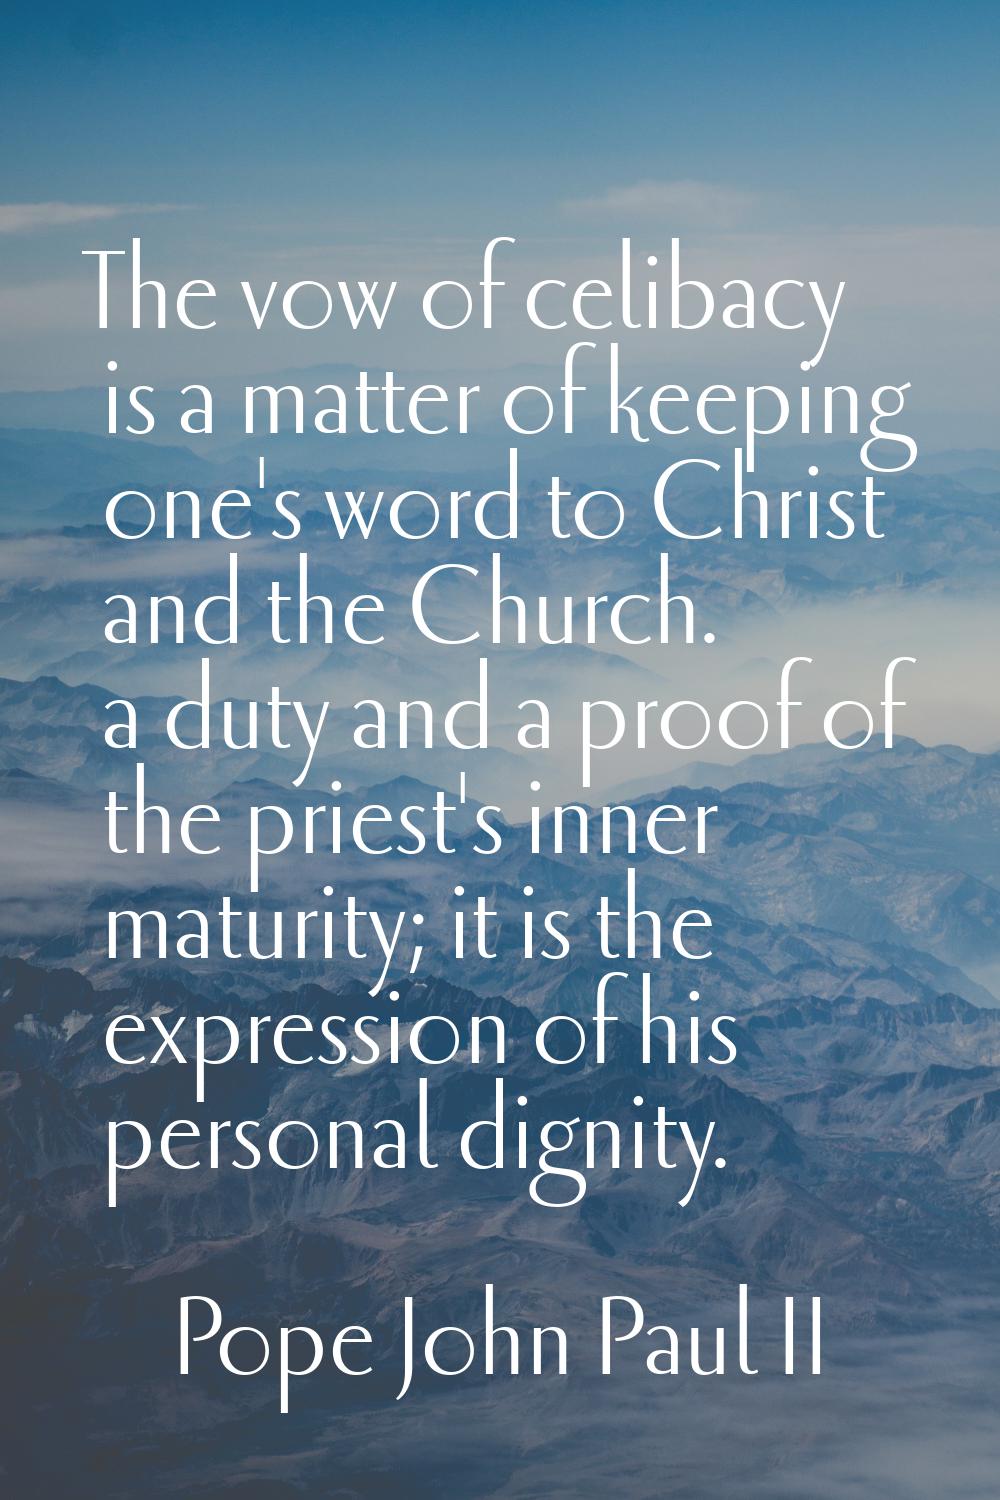 The vow of celibacy is a matter of keeping one's word to Christ and the Church. a duty and a proof 